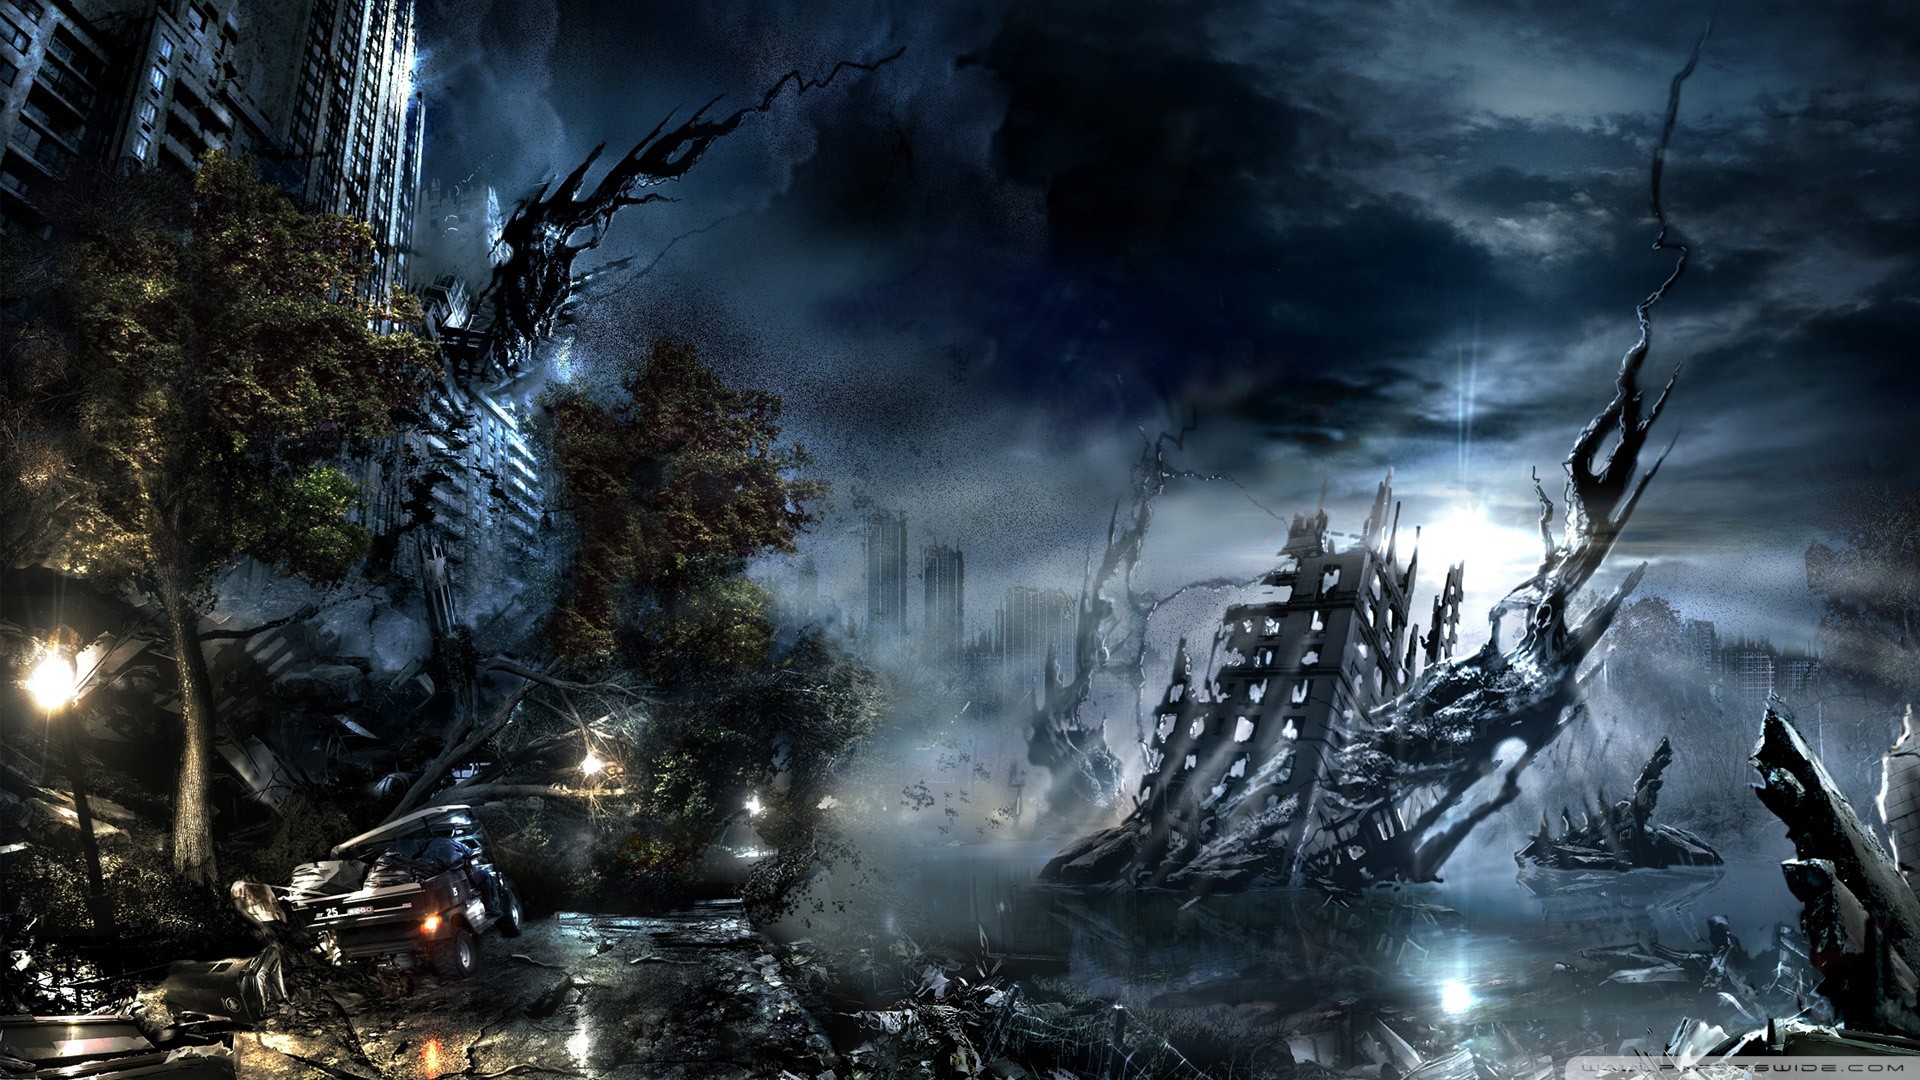 Apocalyptic Chaos Video Games Alone In The Dark Video Game Art Horror 1920x1080